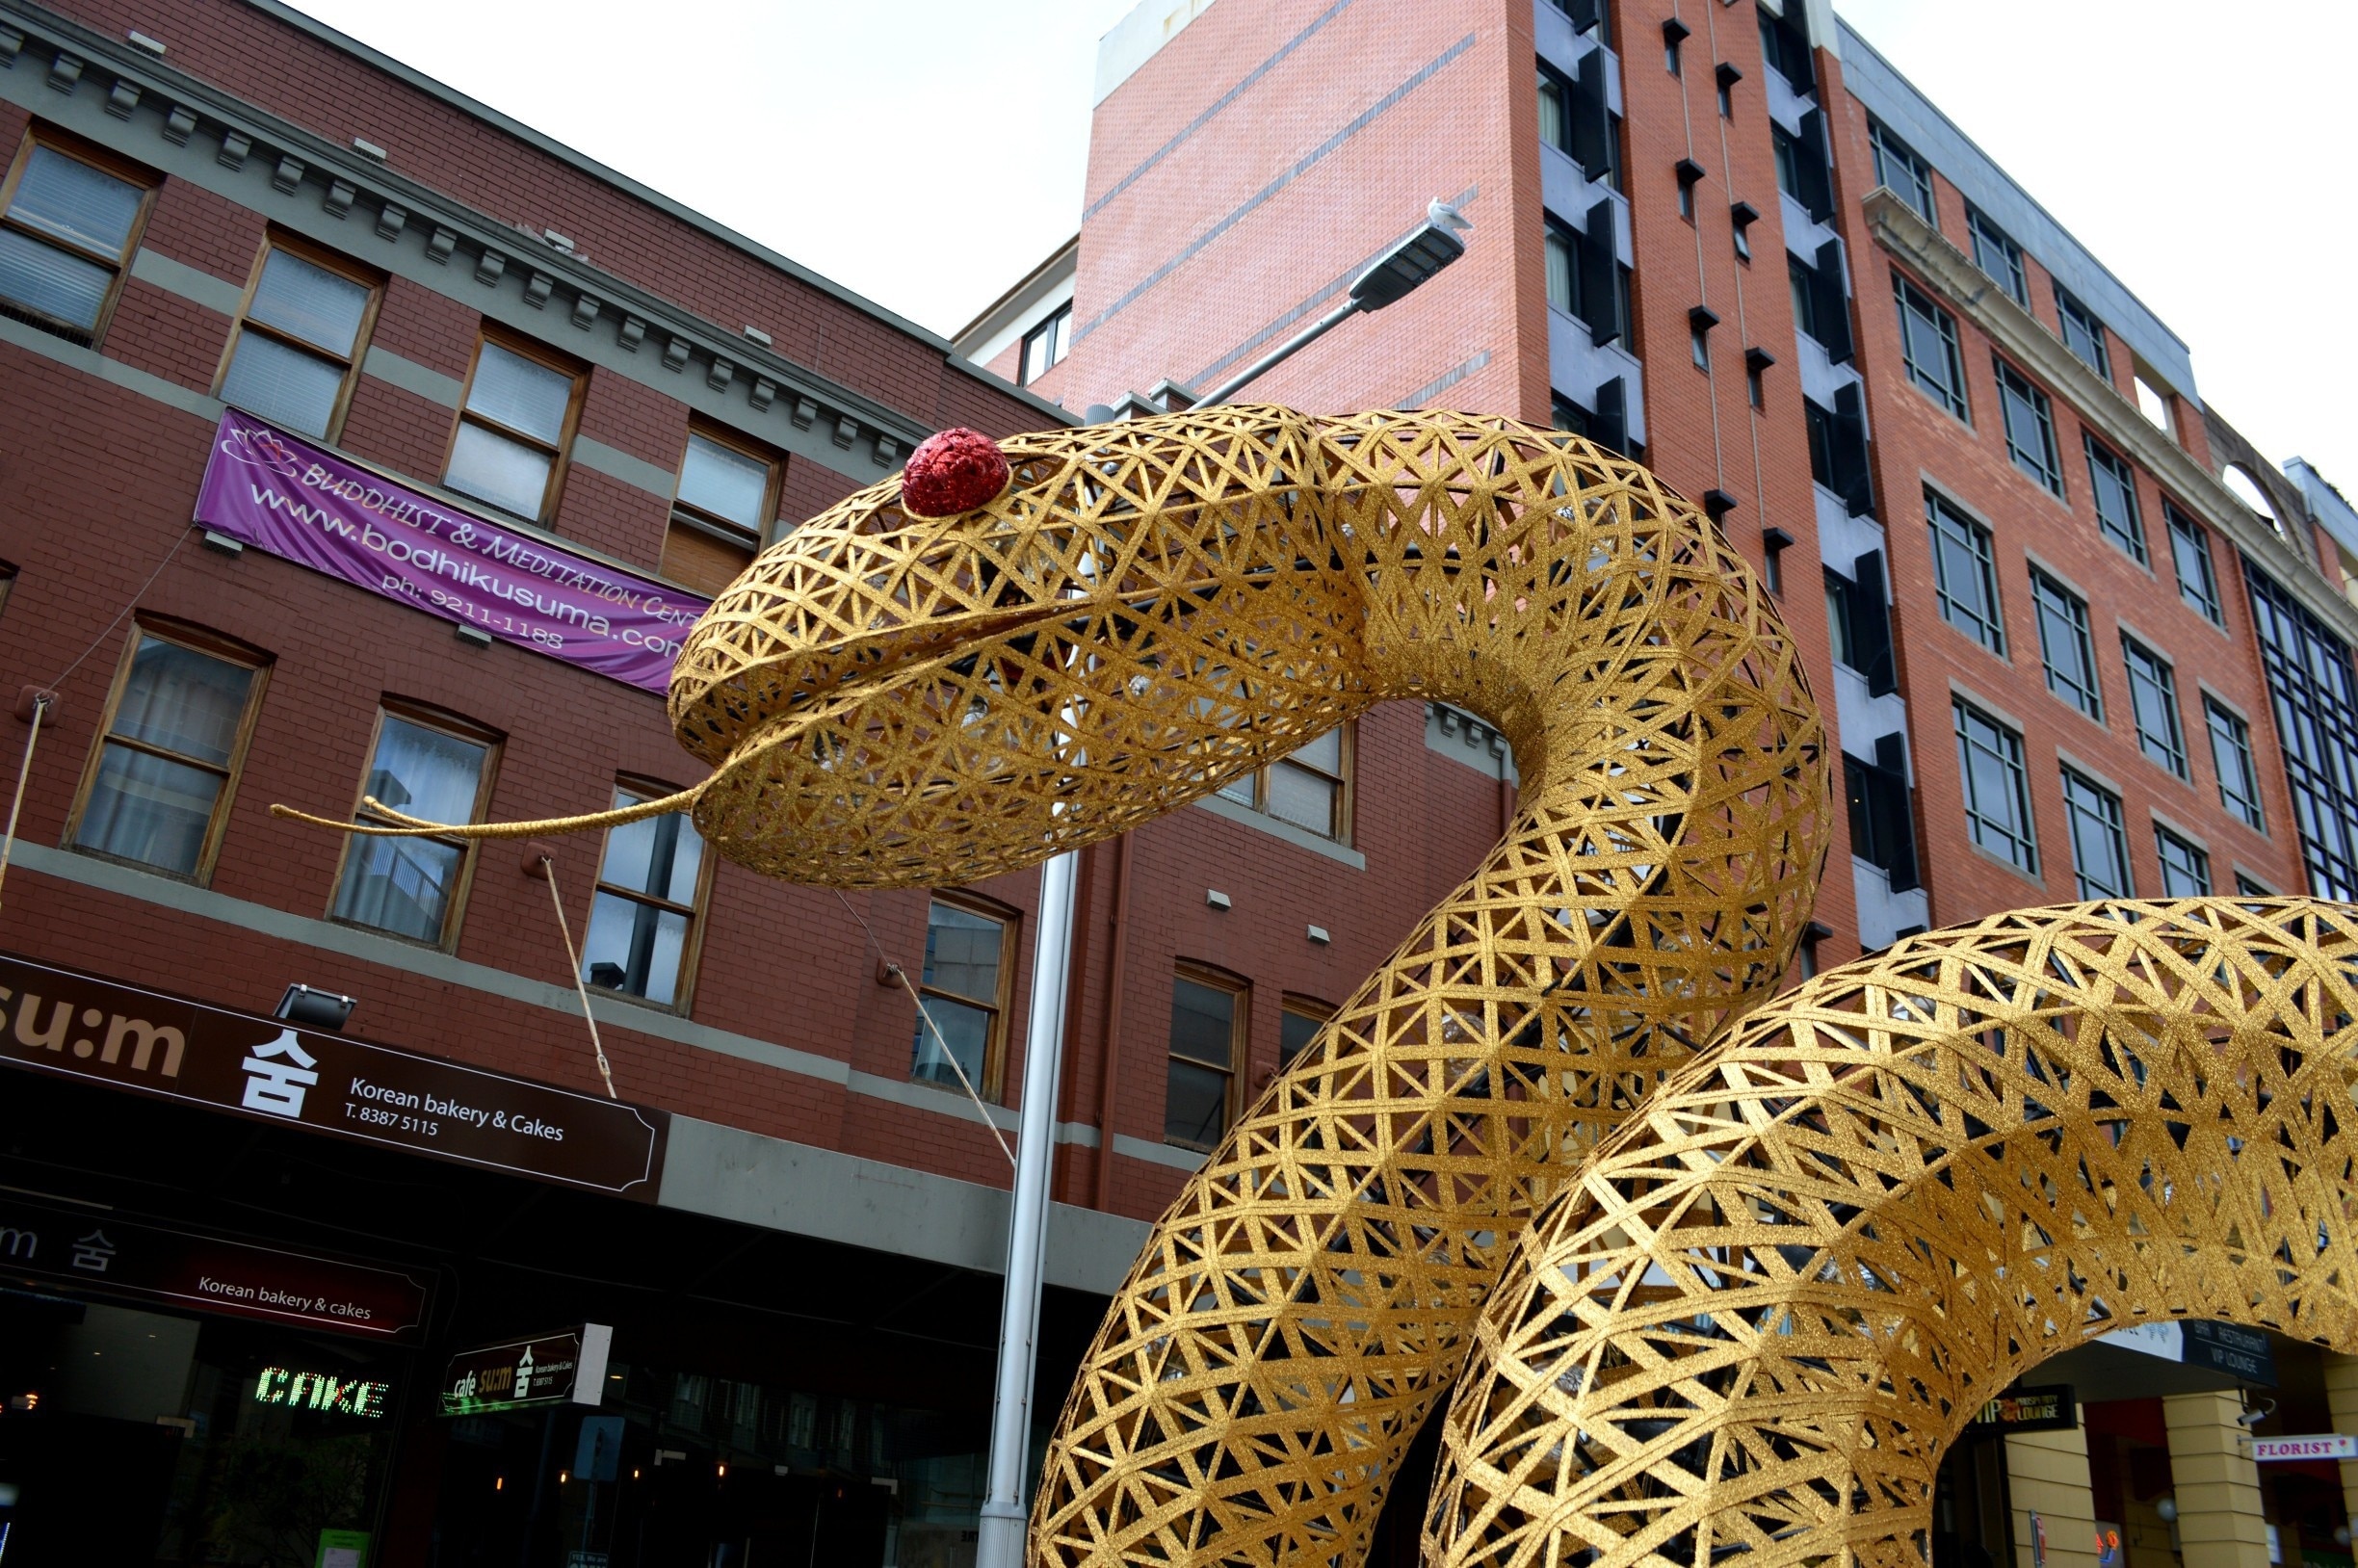 YEAR OF THE SNAKE. One of 12 Zodiacs found around Sydney.  
Chinese New Year celebrations are all over the news. But we experienced it first hand. Read it here and share if you like. https://www.facebook.com/4pairsofItchyFeet/posts/988289231242098
